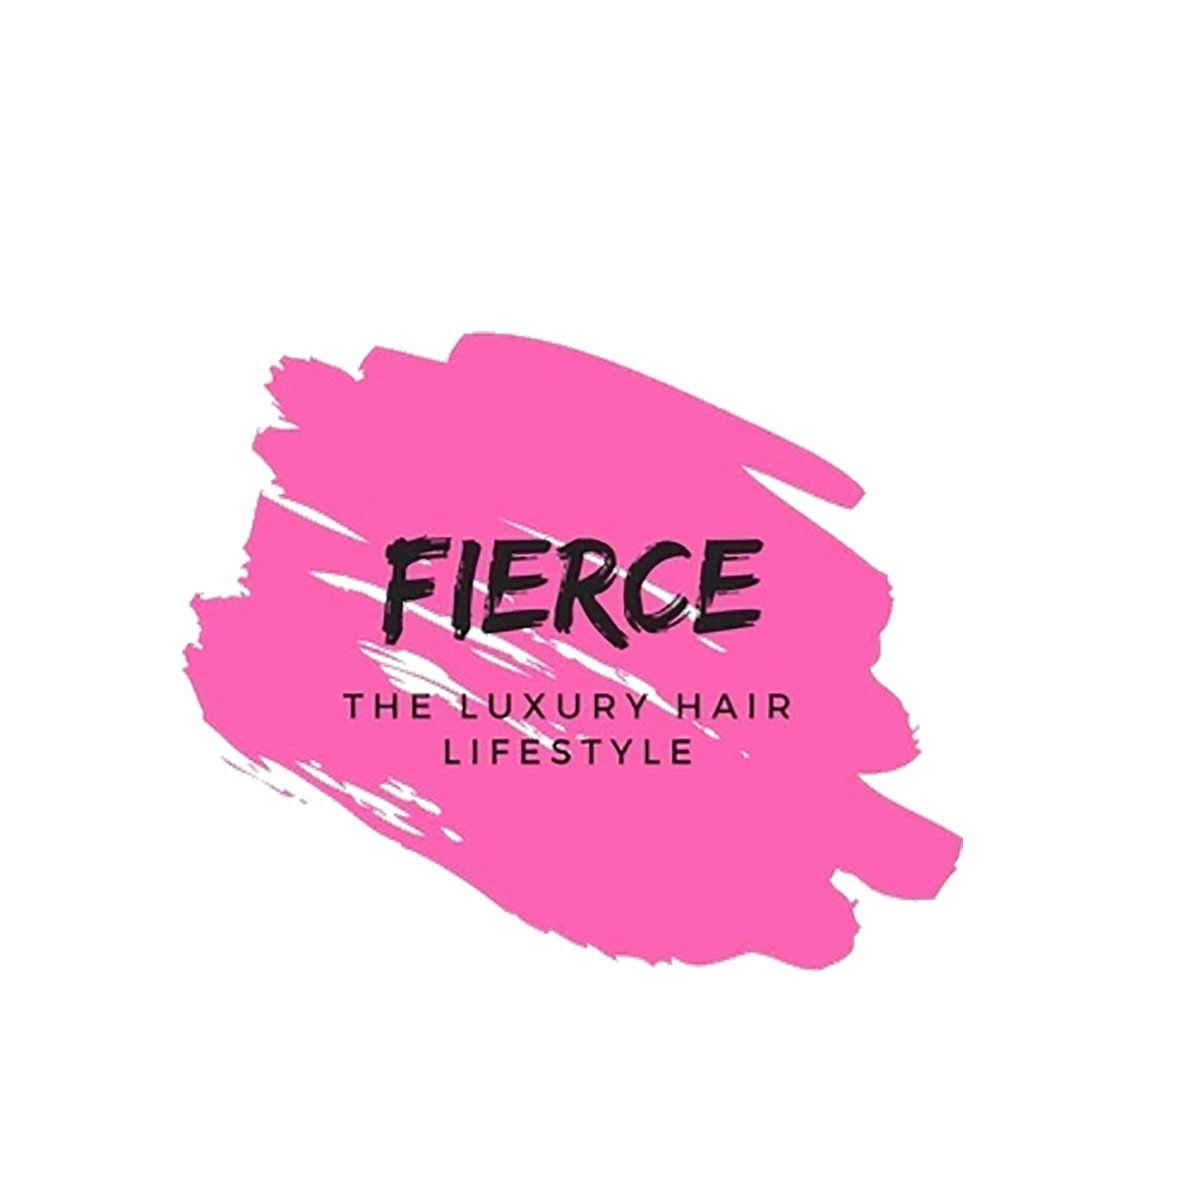 💋The Luxury Hair life | Shop Now and join the #fiercehairgang😍